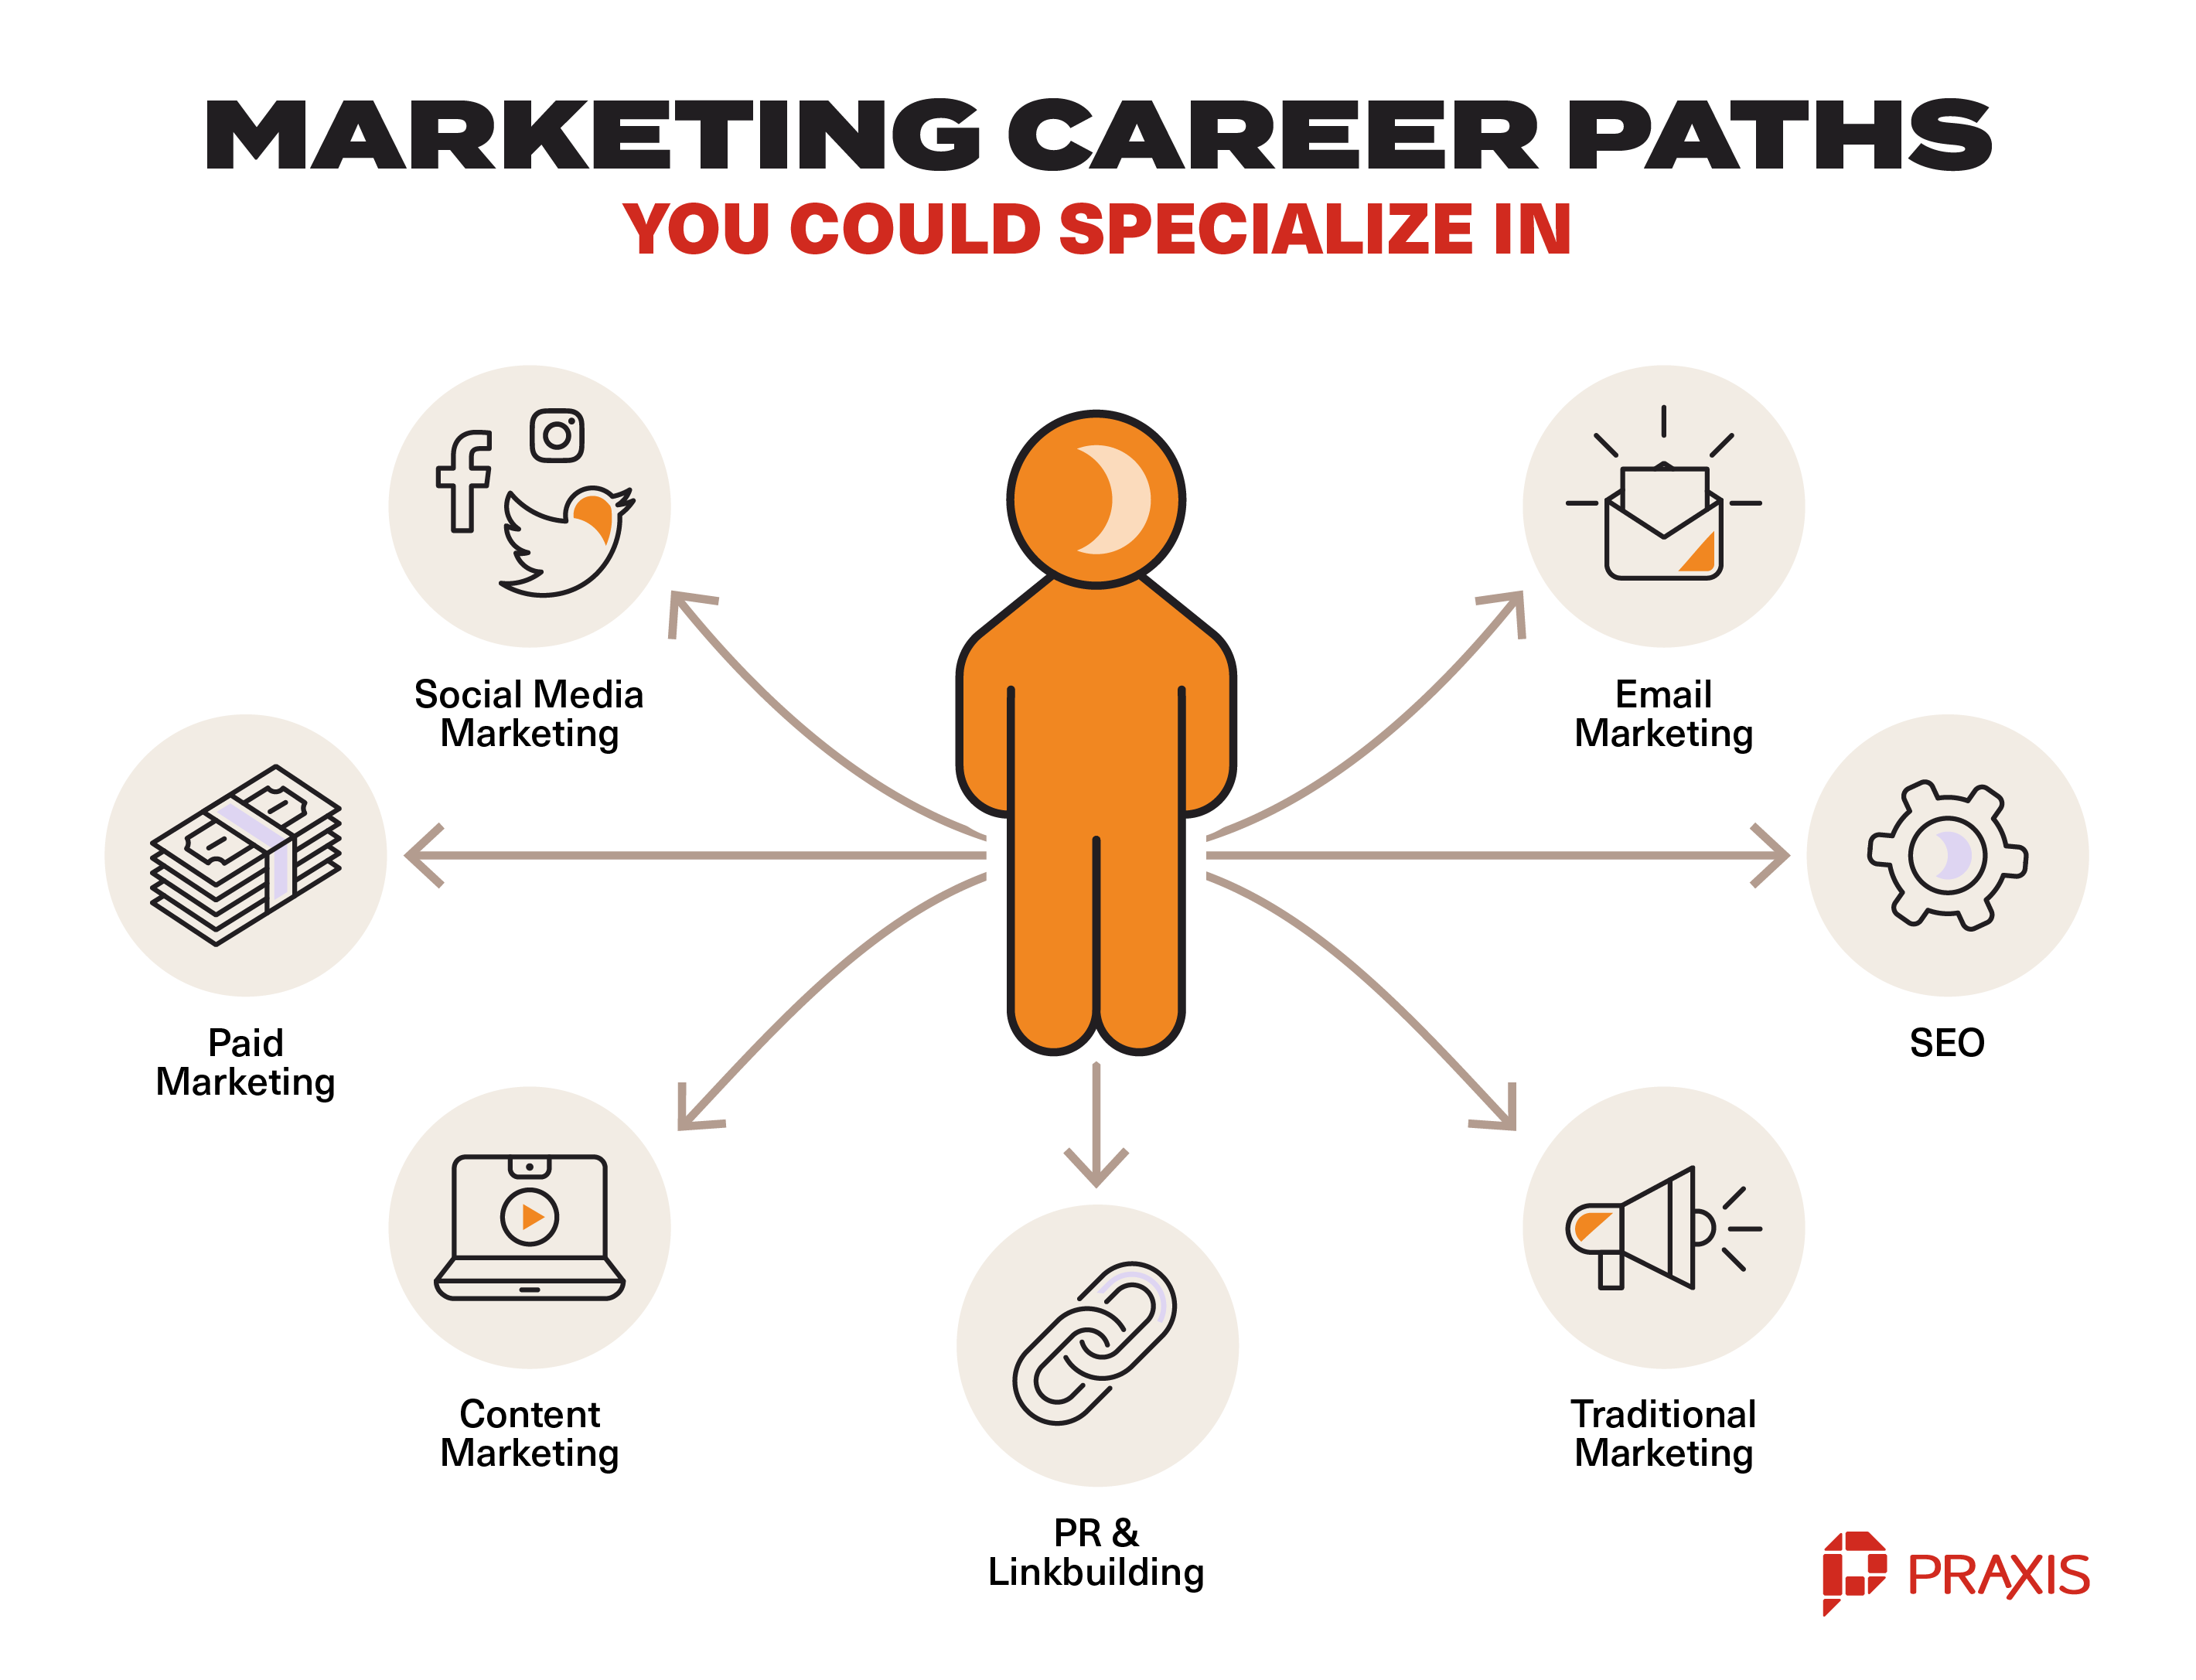 Marketing Career Path: Here’s How to Get into Marketing